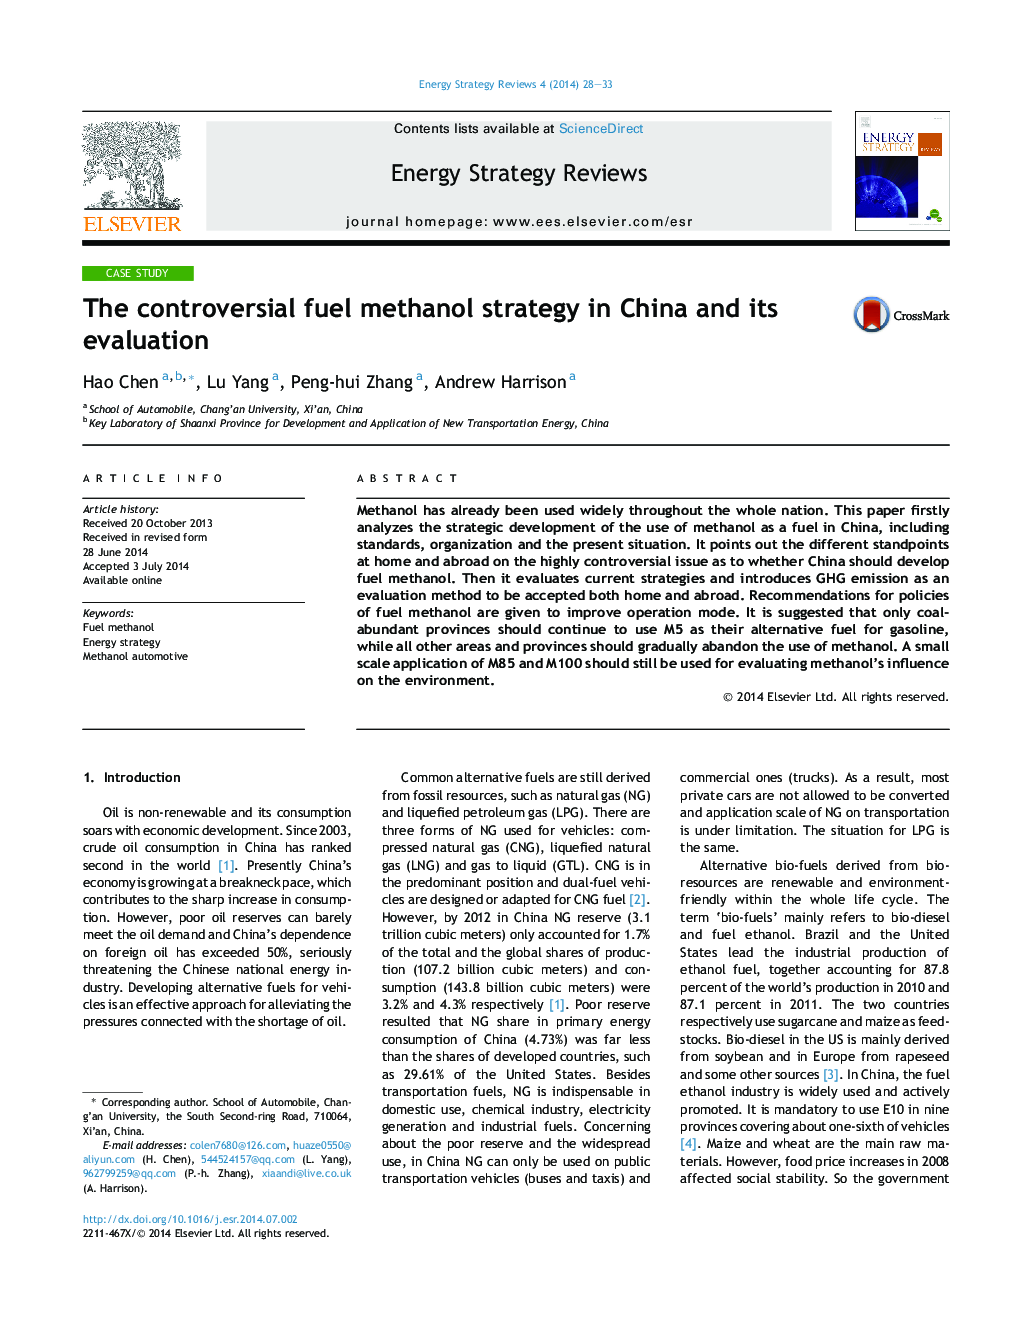 The controversial fuel methanol strategy in China and its evaluation